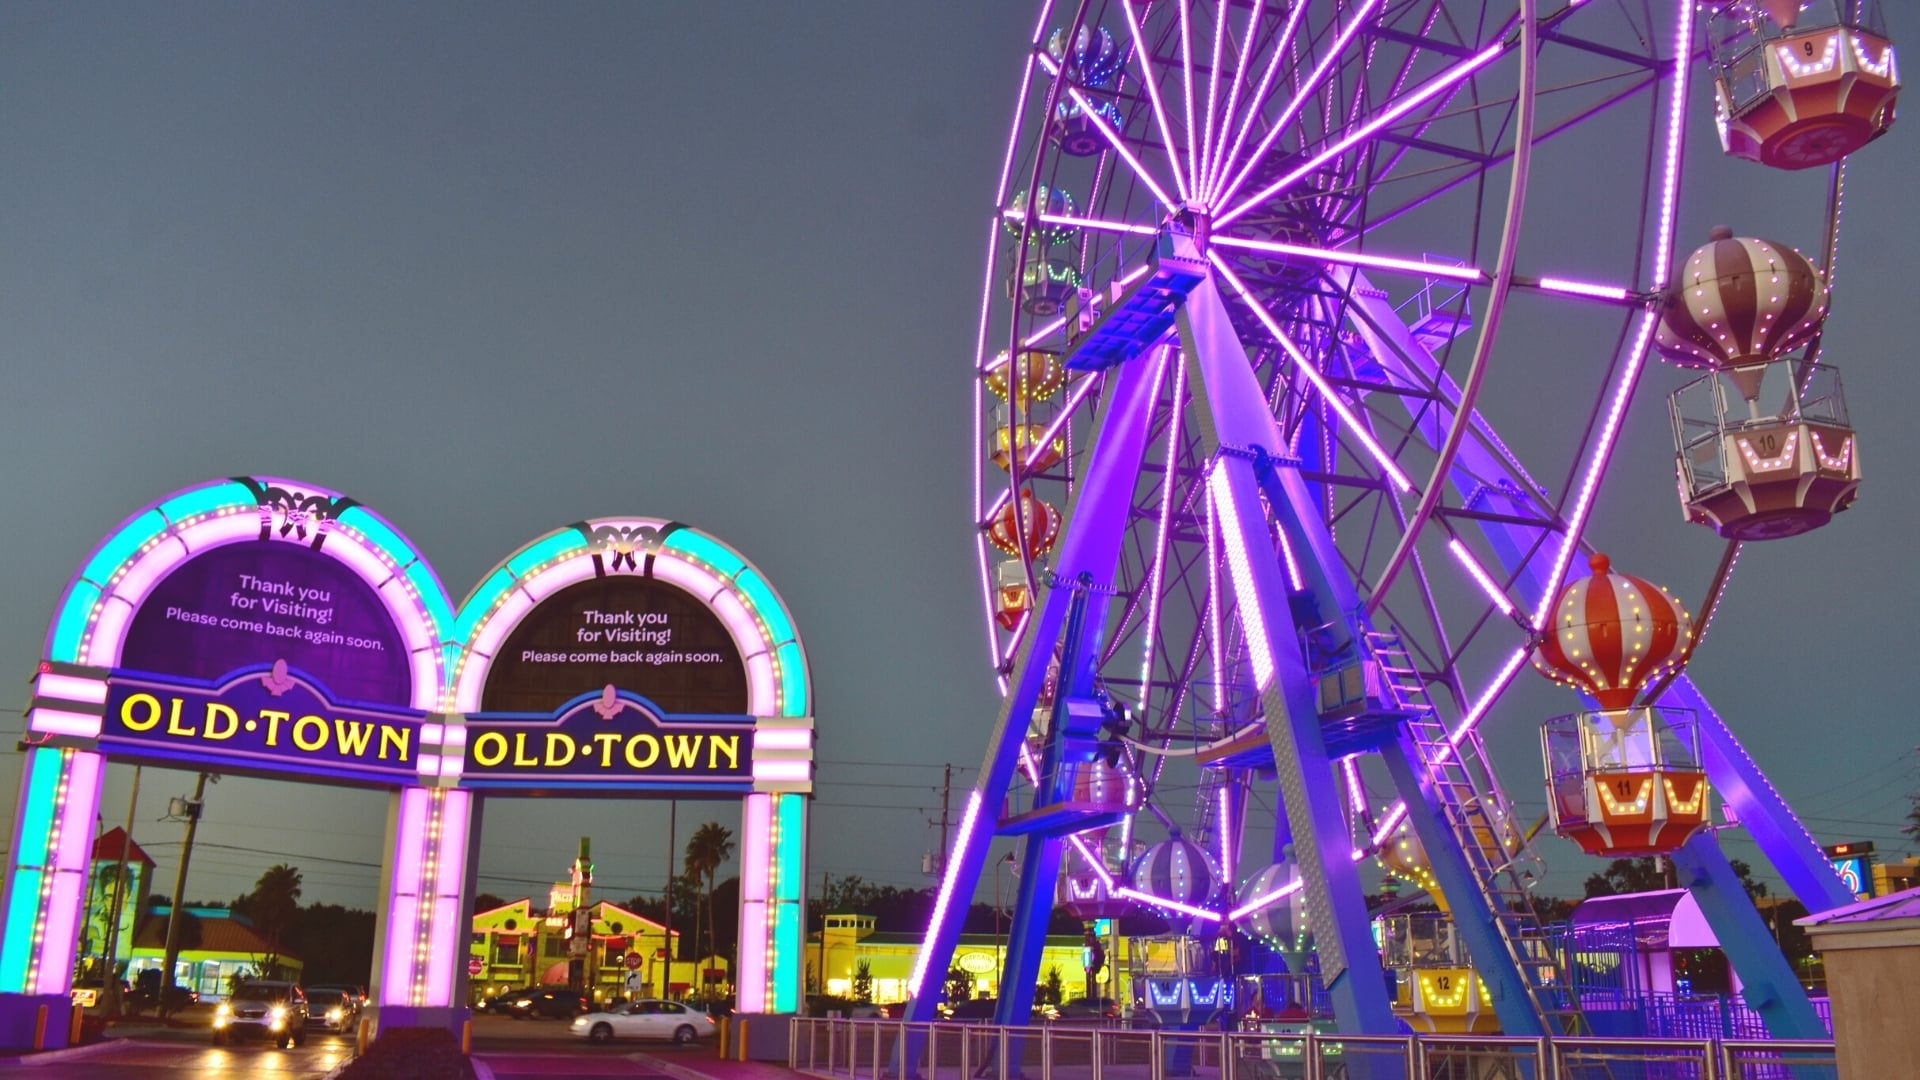 Old Town Kissimmee Entrance with Ferris Wheel - Pet-Friendly Attraction near Disney World